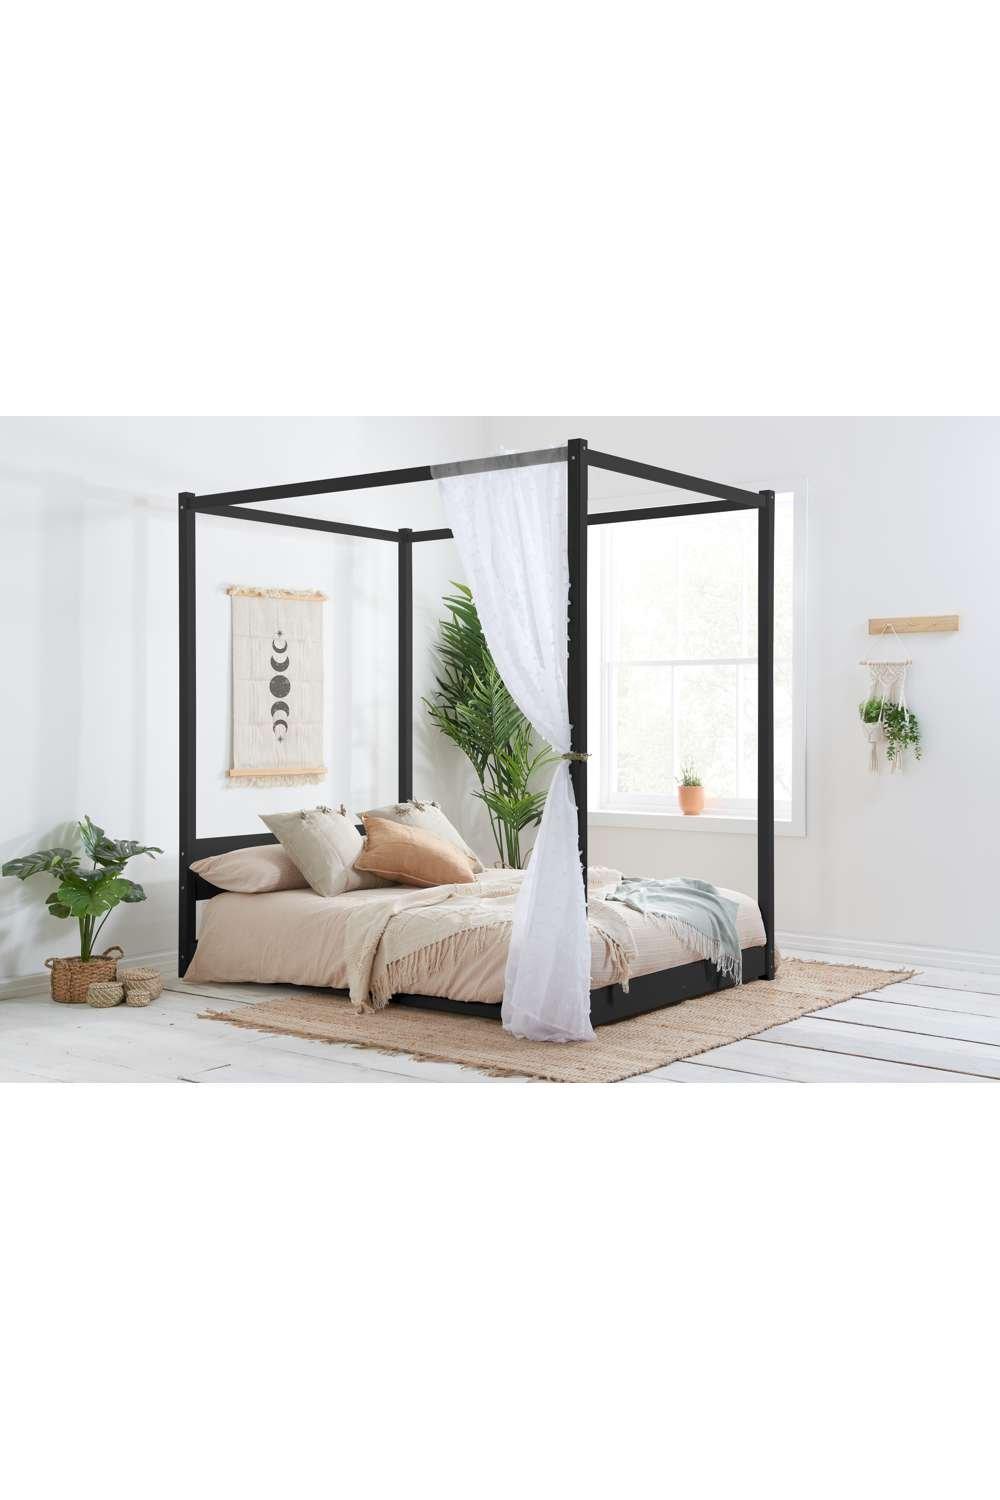 Four Poster Bed Frame Solid Wood 4 Poster Canopy Darwin